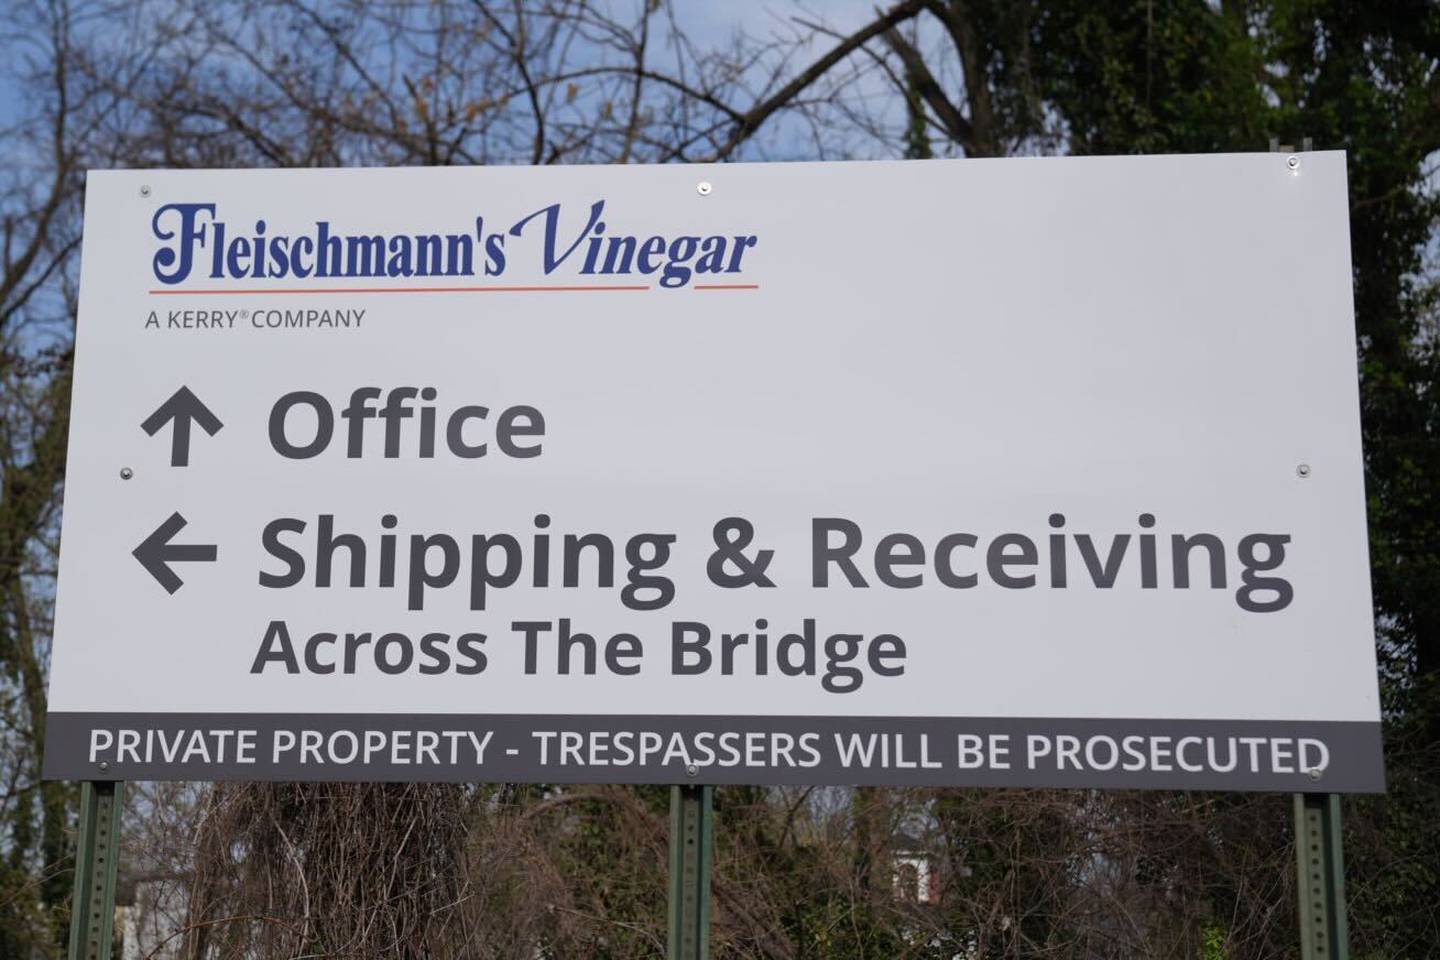 A sign pointing visitors toward the main office building outside Fleischmann’s Vinegar near Baltimore’s Cold Spring neighborhood.